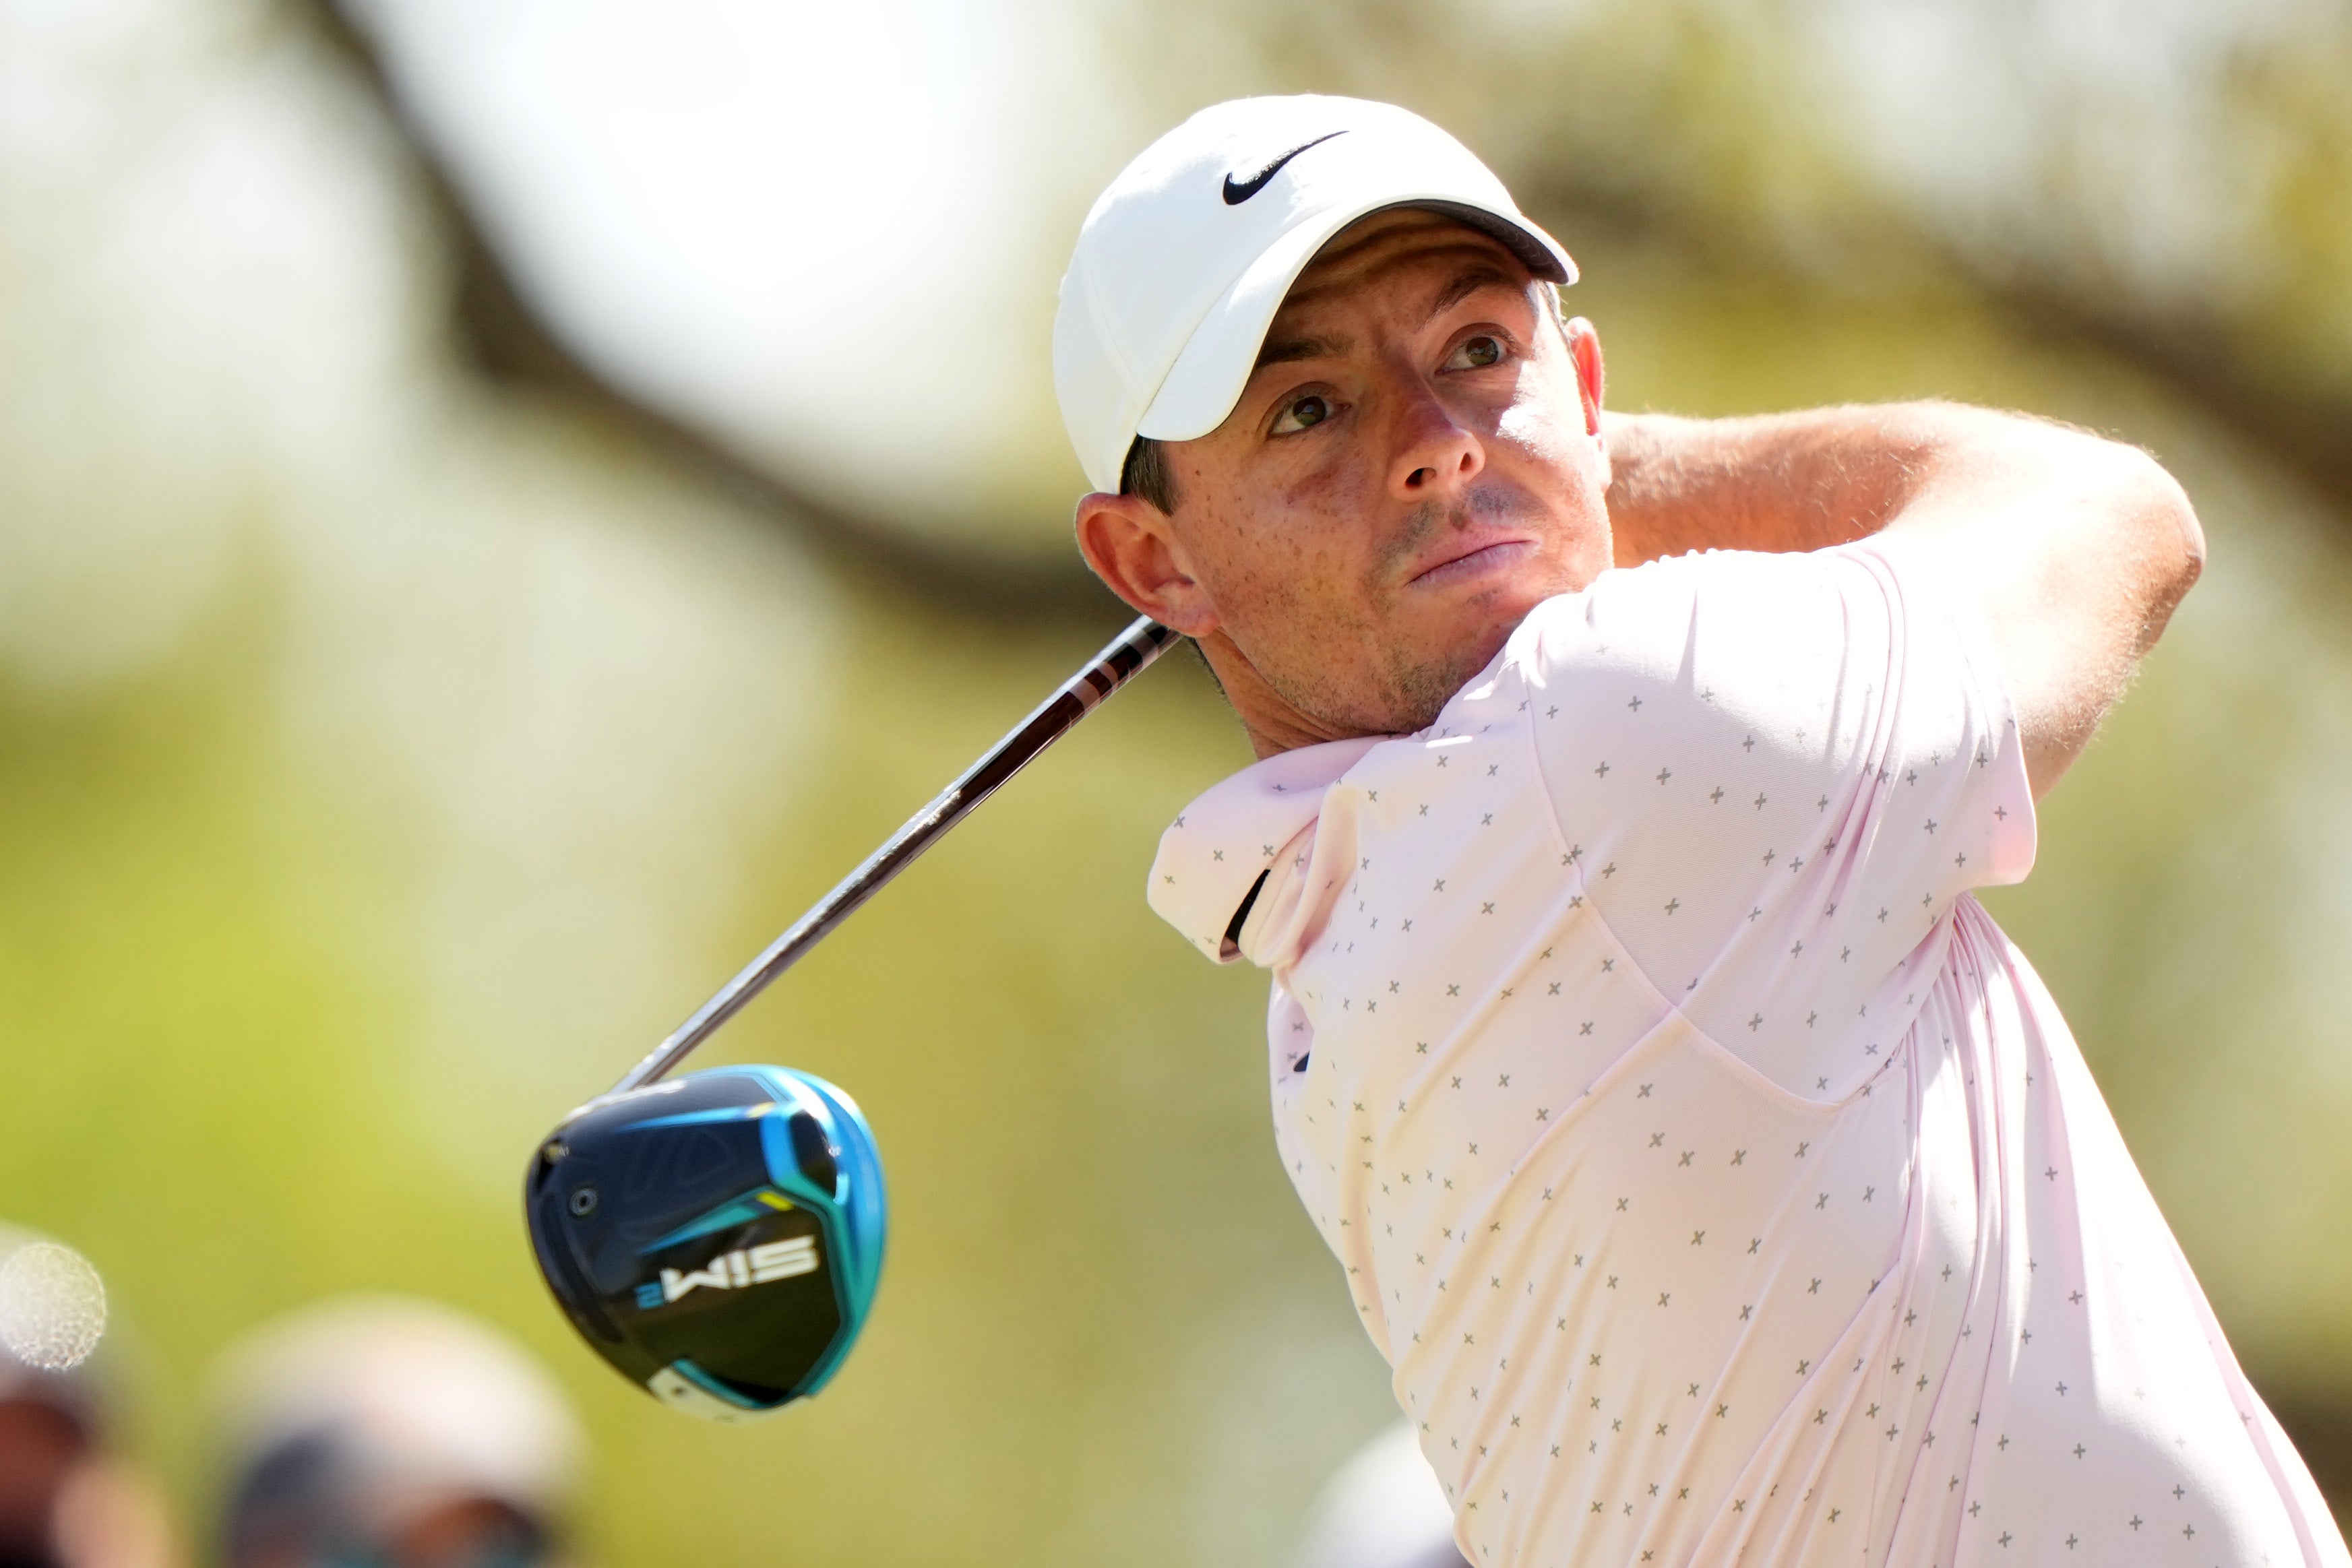 For Rory McIlroy, expectations ahead of the tournament are unusually low